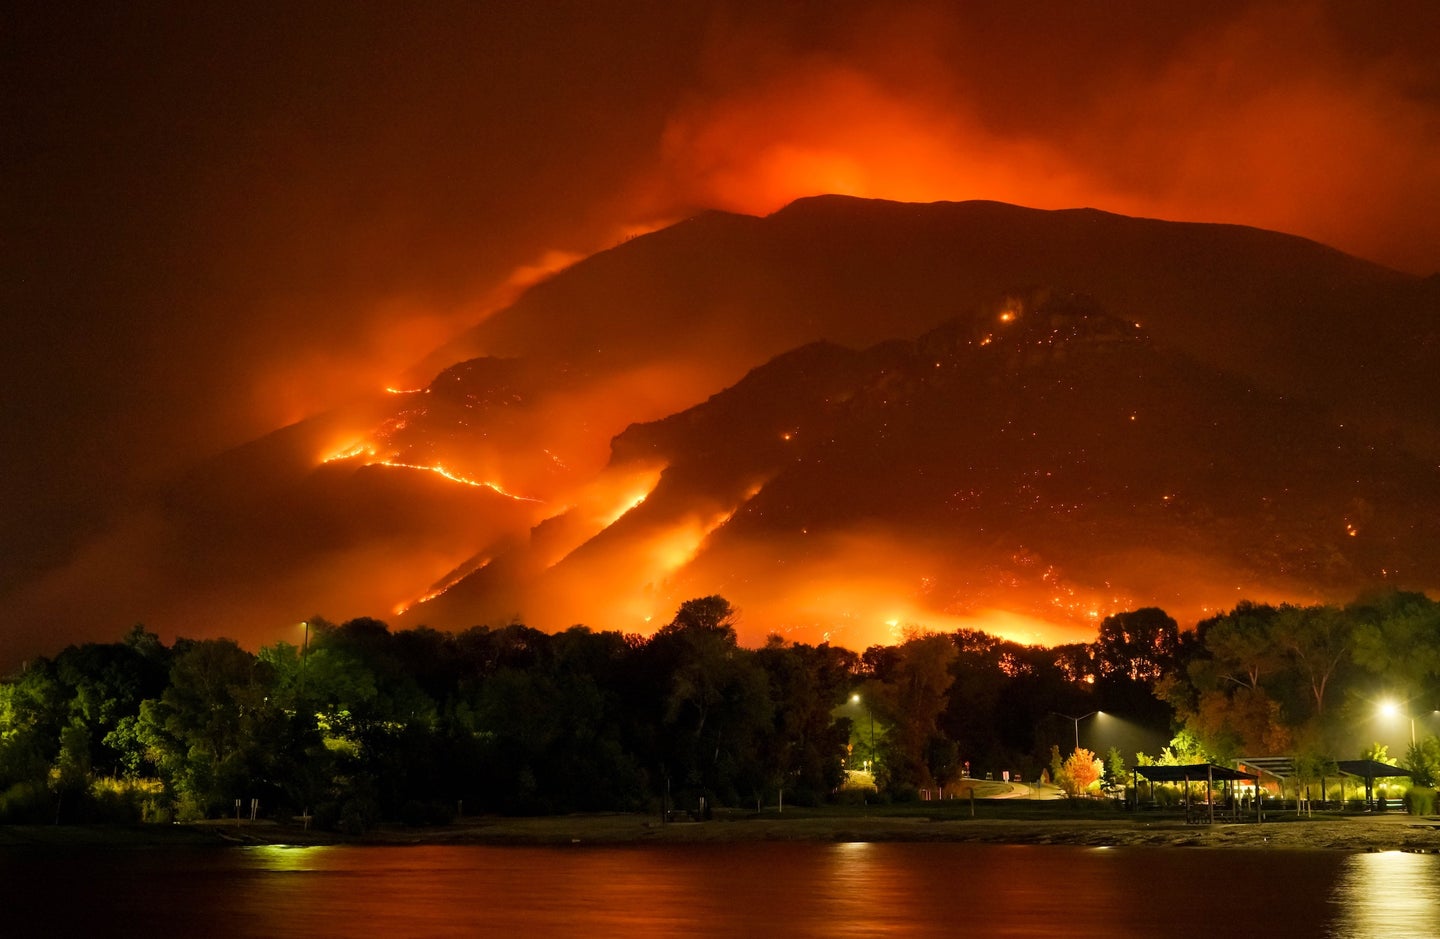 Photo of wildfires covering mountains with residential area below it